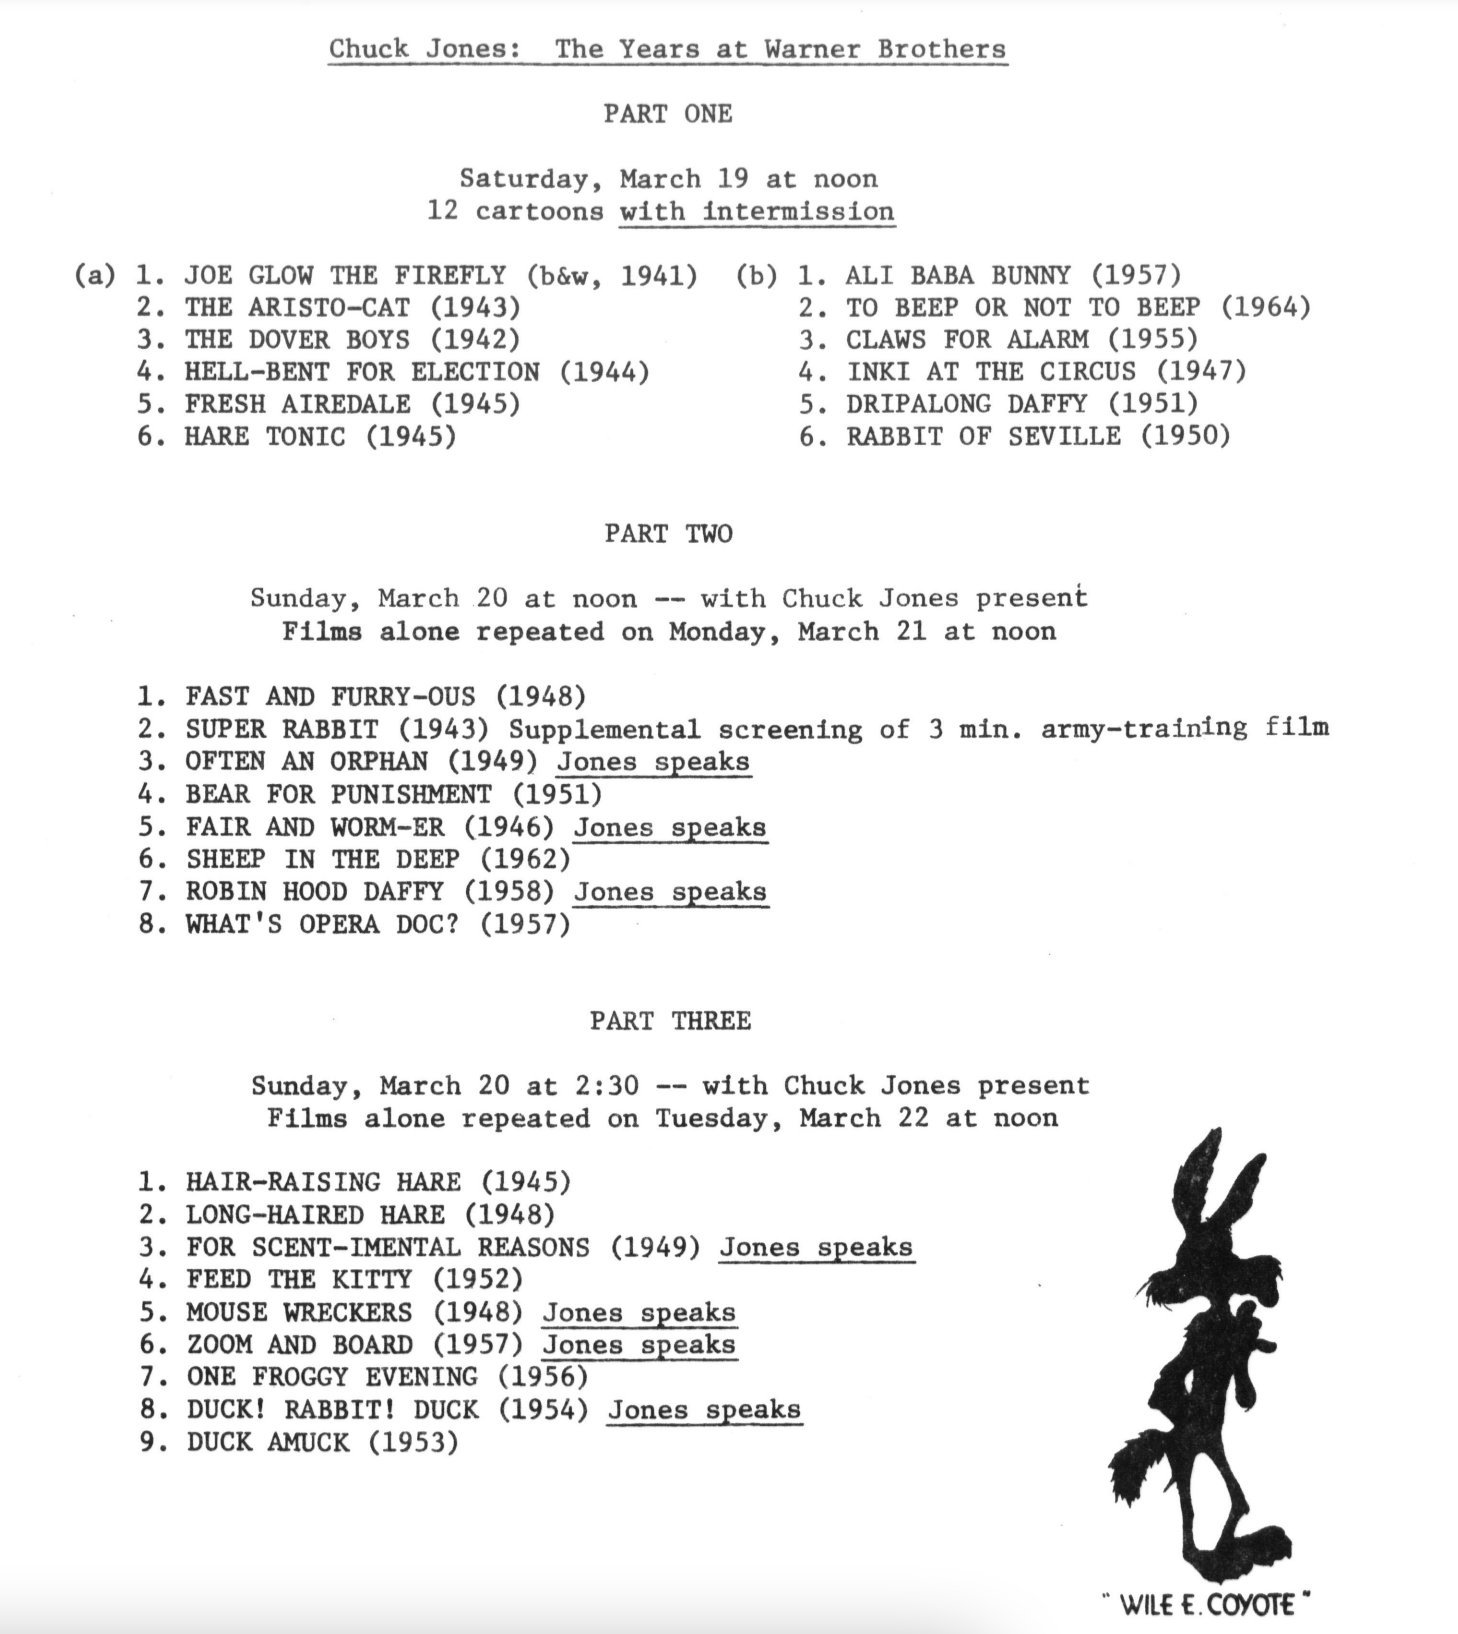 A film program lists dates, times, and titles of Chuck Jones Warner Brothers cartoons. A silhouette of Wile E. Coyote appears at the bottom right.